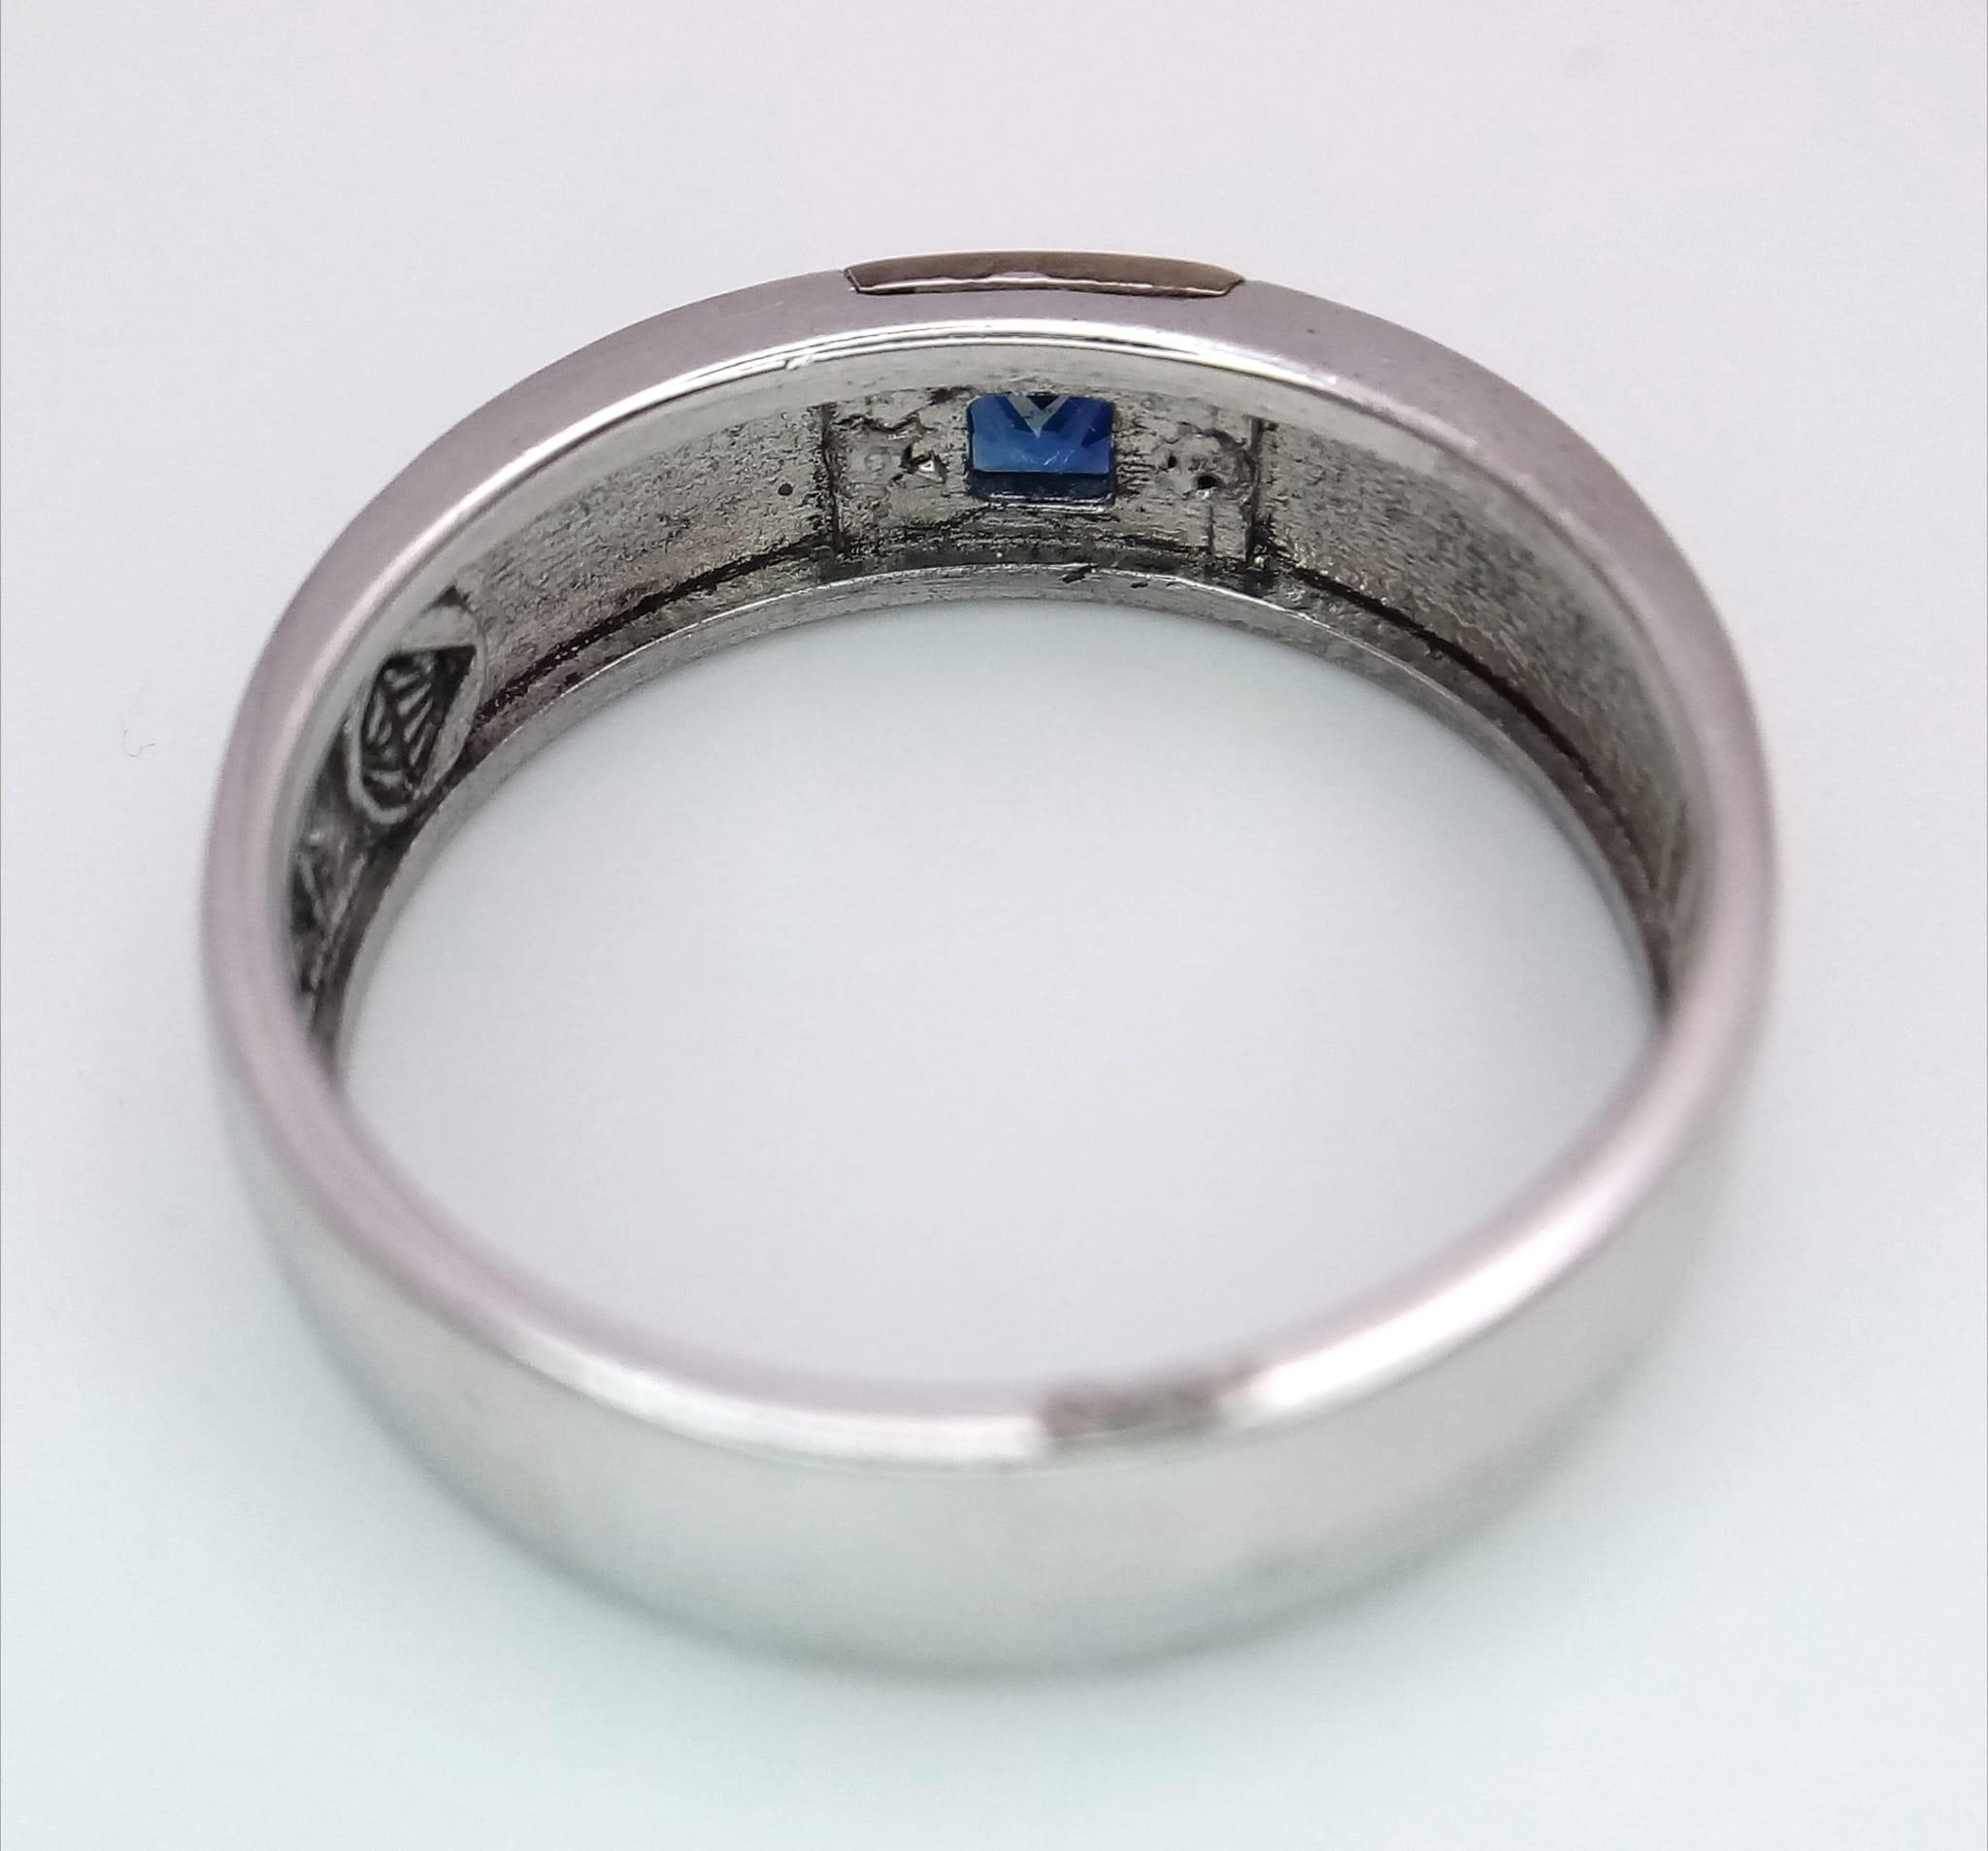 A 925 Silver Blue Stone Gents Ring. Size U. - Image 6 of 9